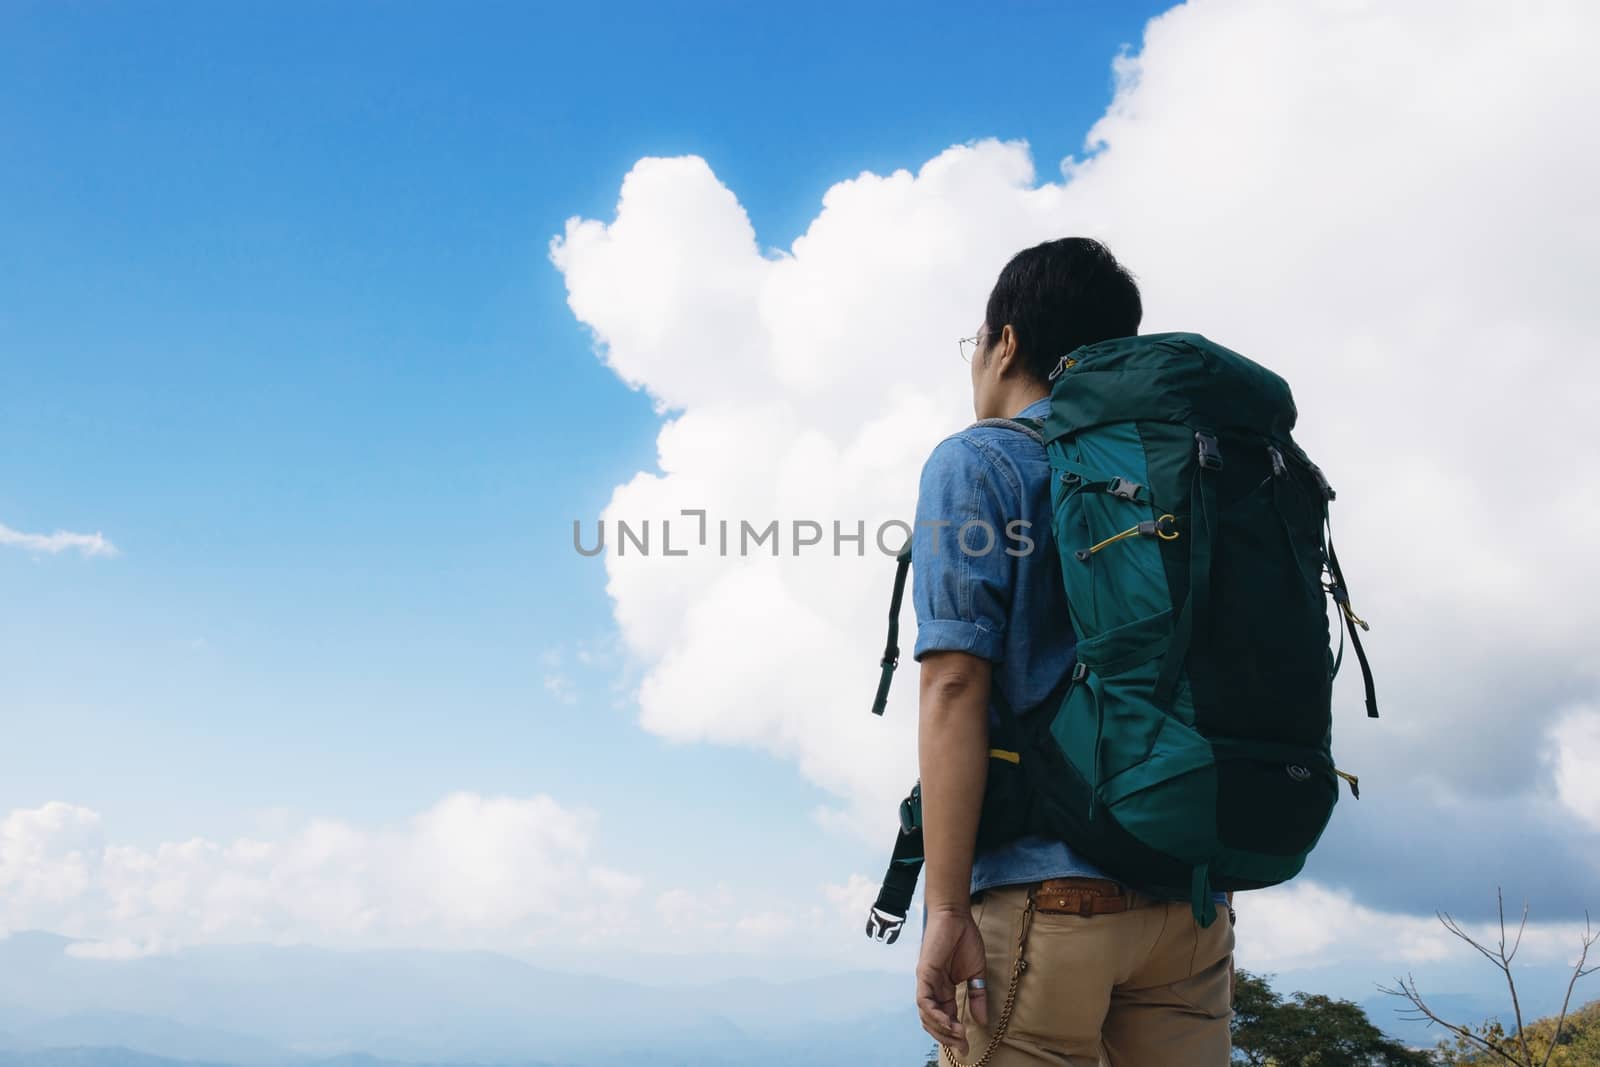 Man of traveler on mountain with the blue sky.